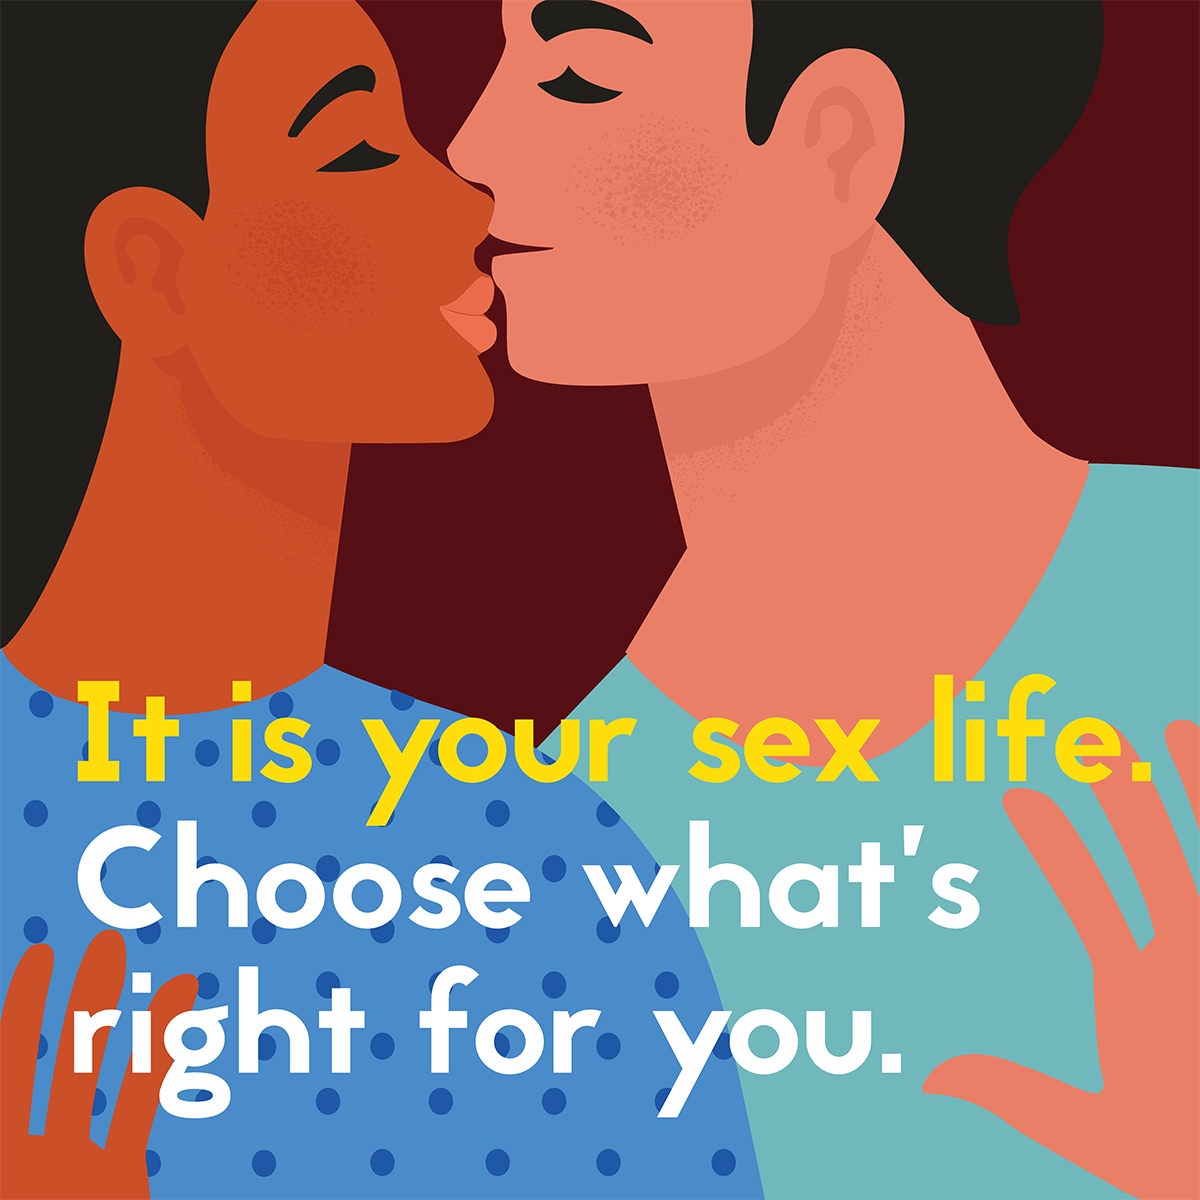 It's your sex life. Choose what's right for you.